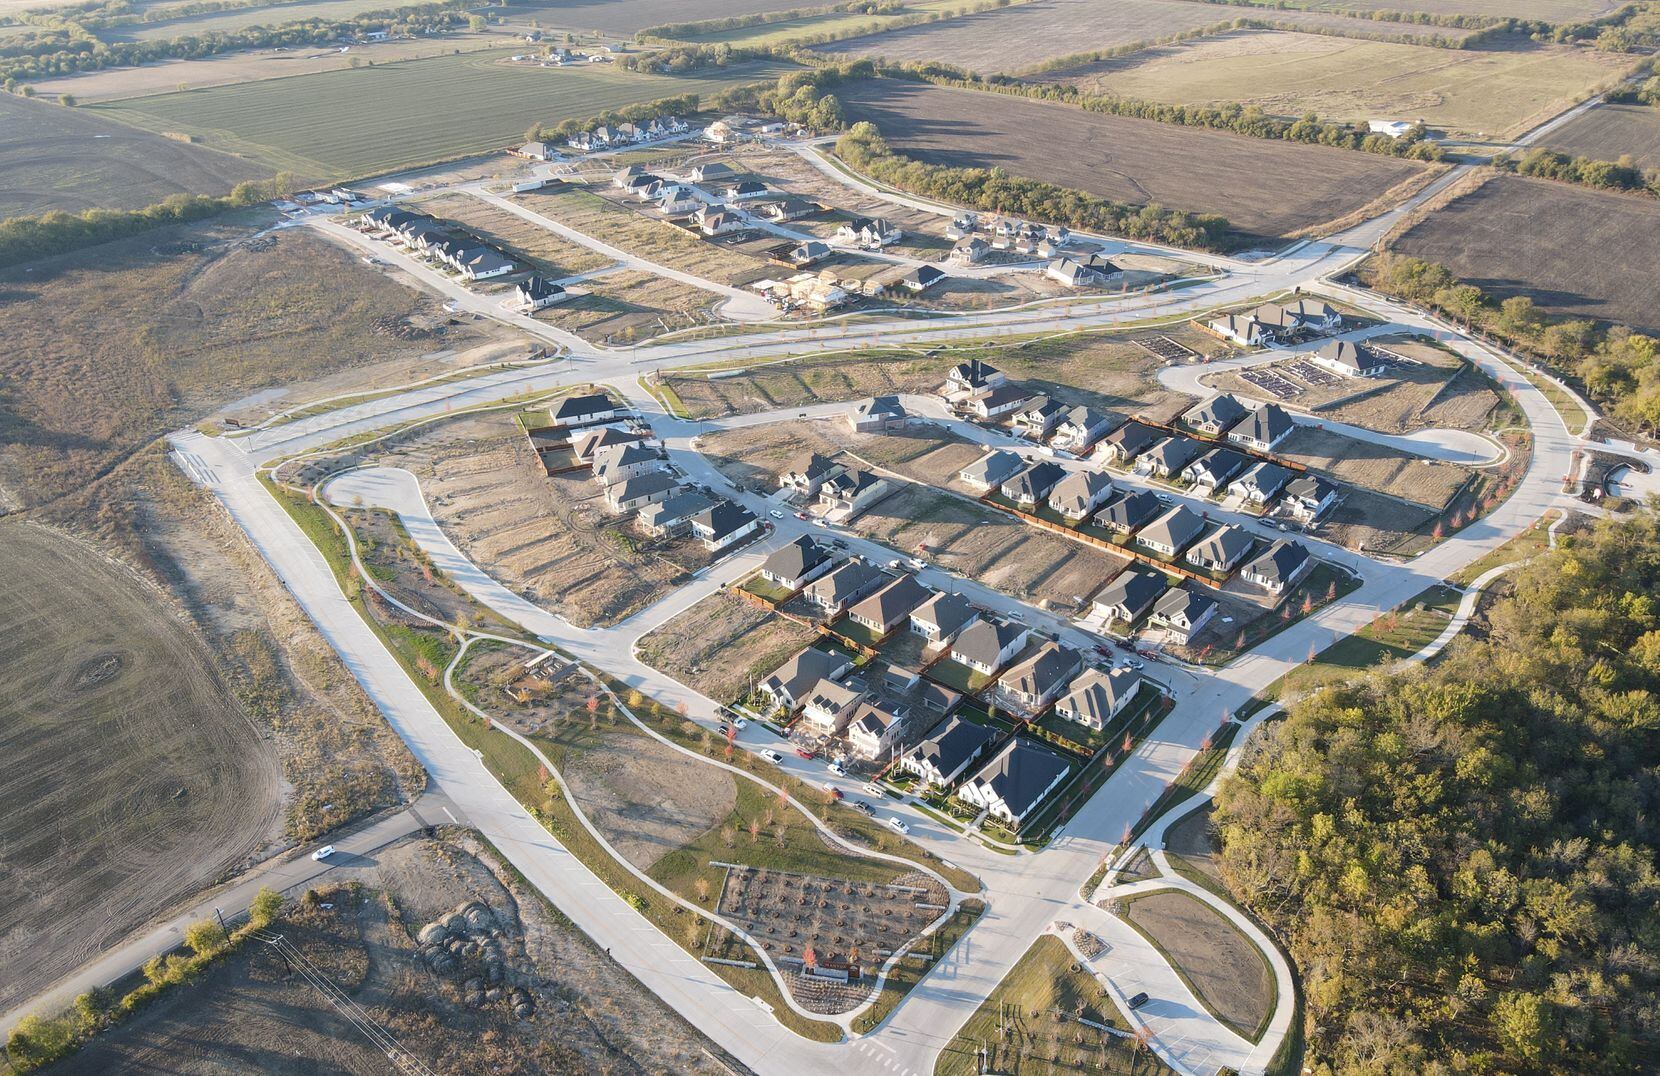 International developer Risland US Holdings is close to completing the first phase of its 6,000-home Mantua community at the southern edge of Grayson County.
default